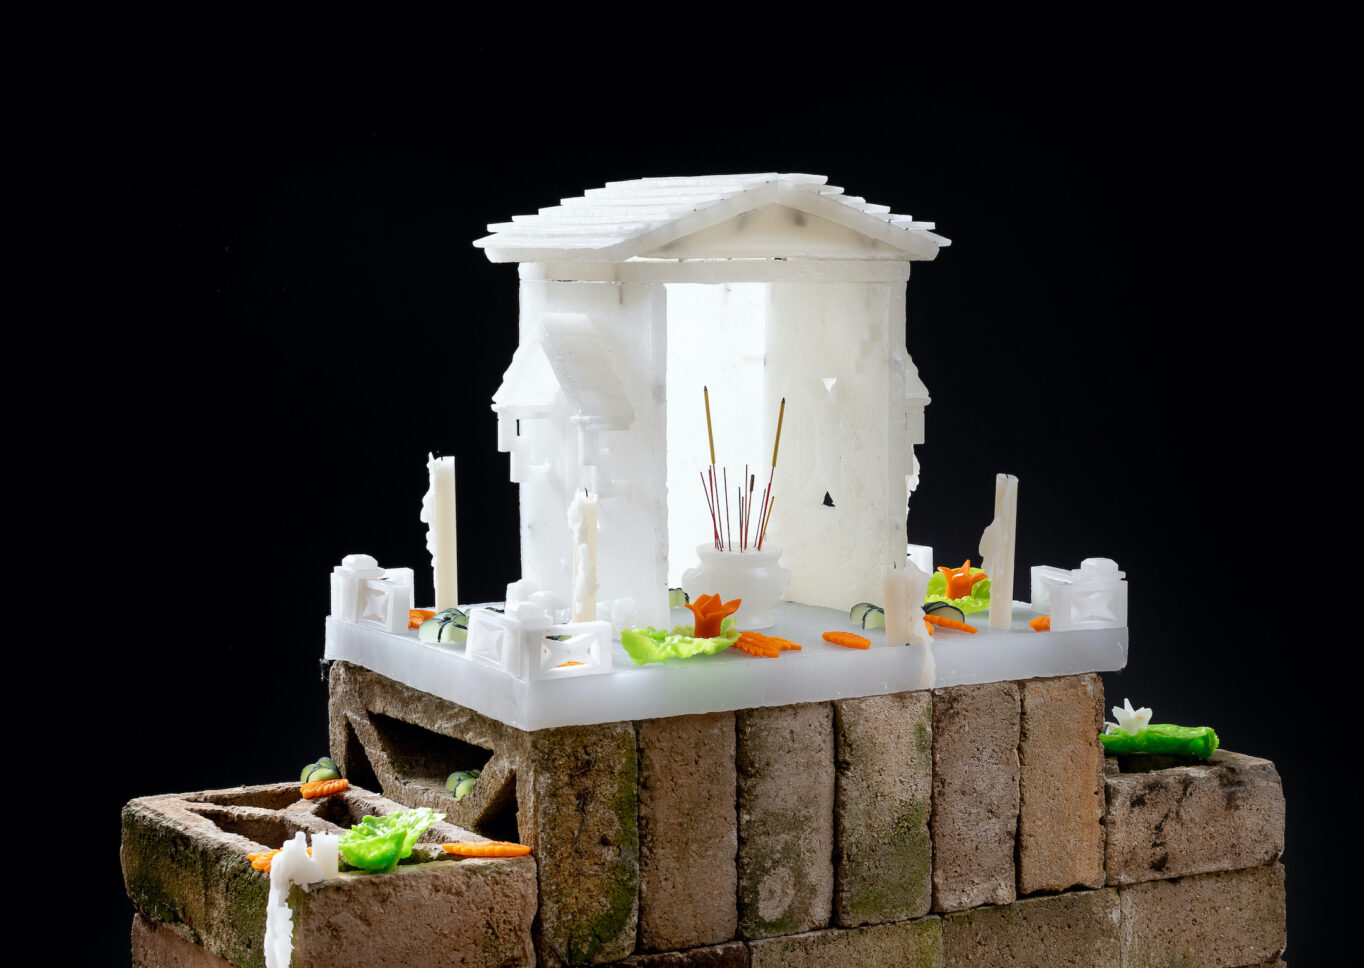 A small white shrine consisting of two side walls and a peaked roof rests on a stack of brown bricks. Within the shrine is a small white vase holding incense sticks, and displayed around it are white candles and small pieces of finely cut orange and green vegetables.